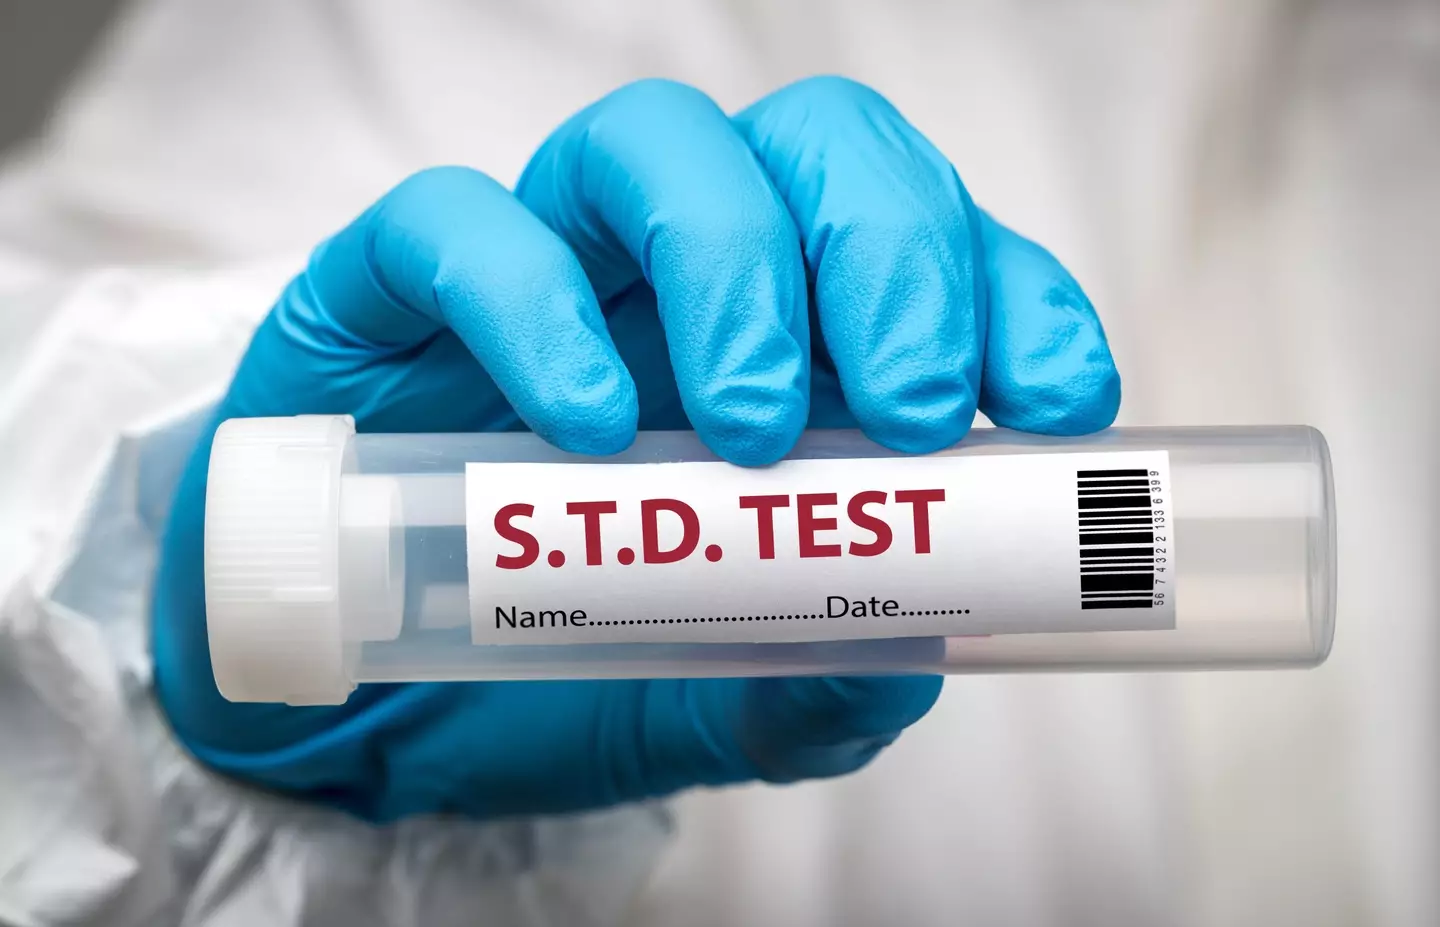 The consequences of some STDs can be devastating.